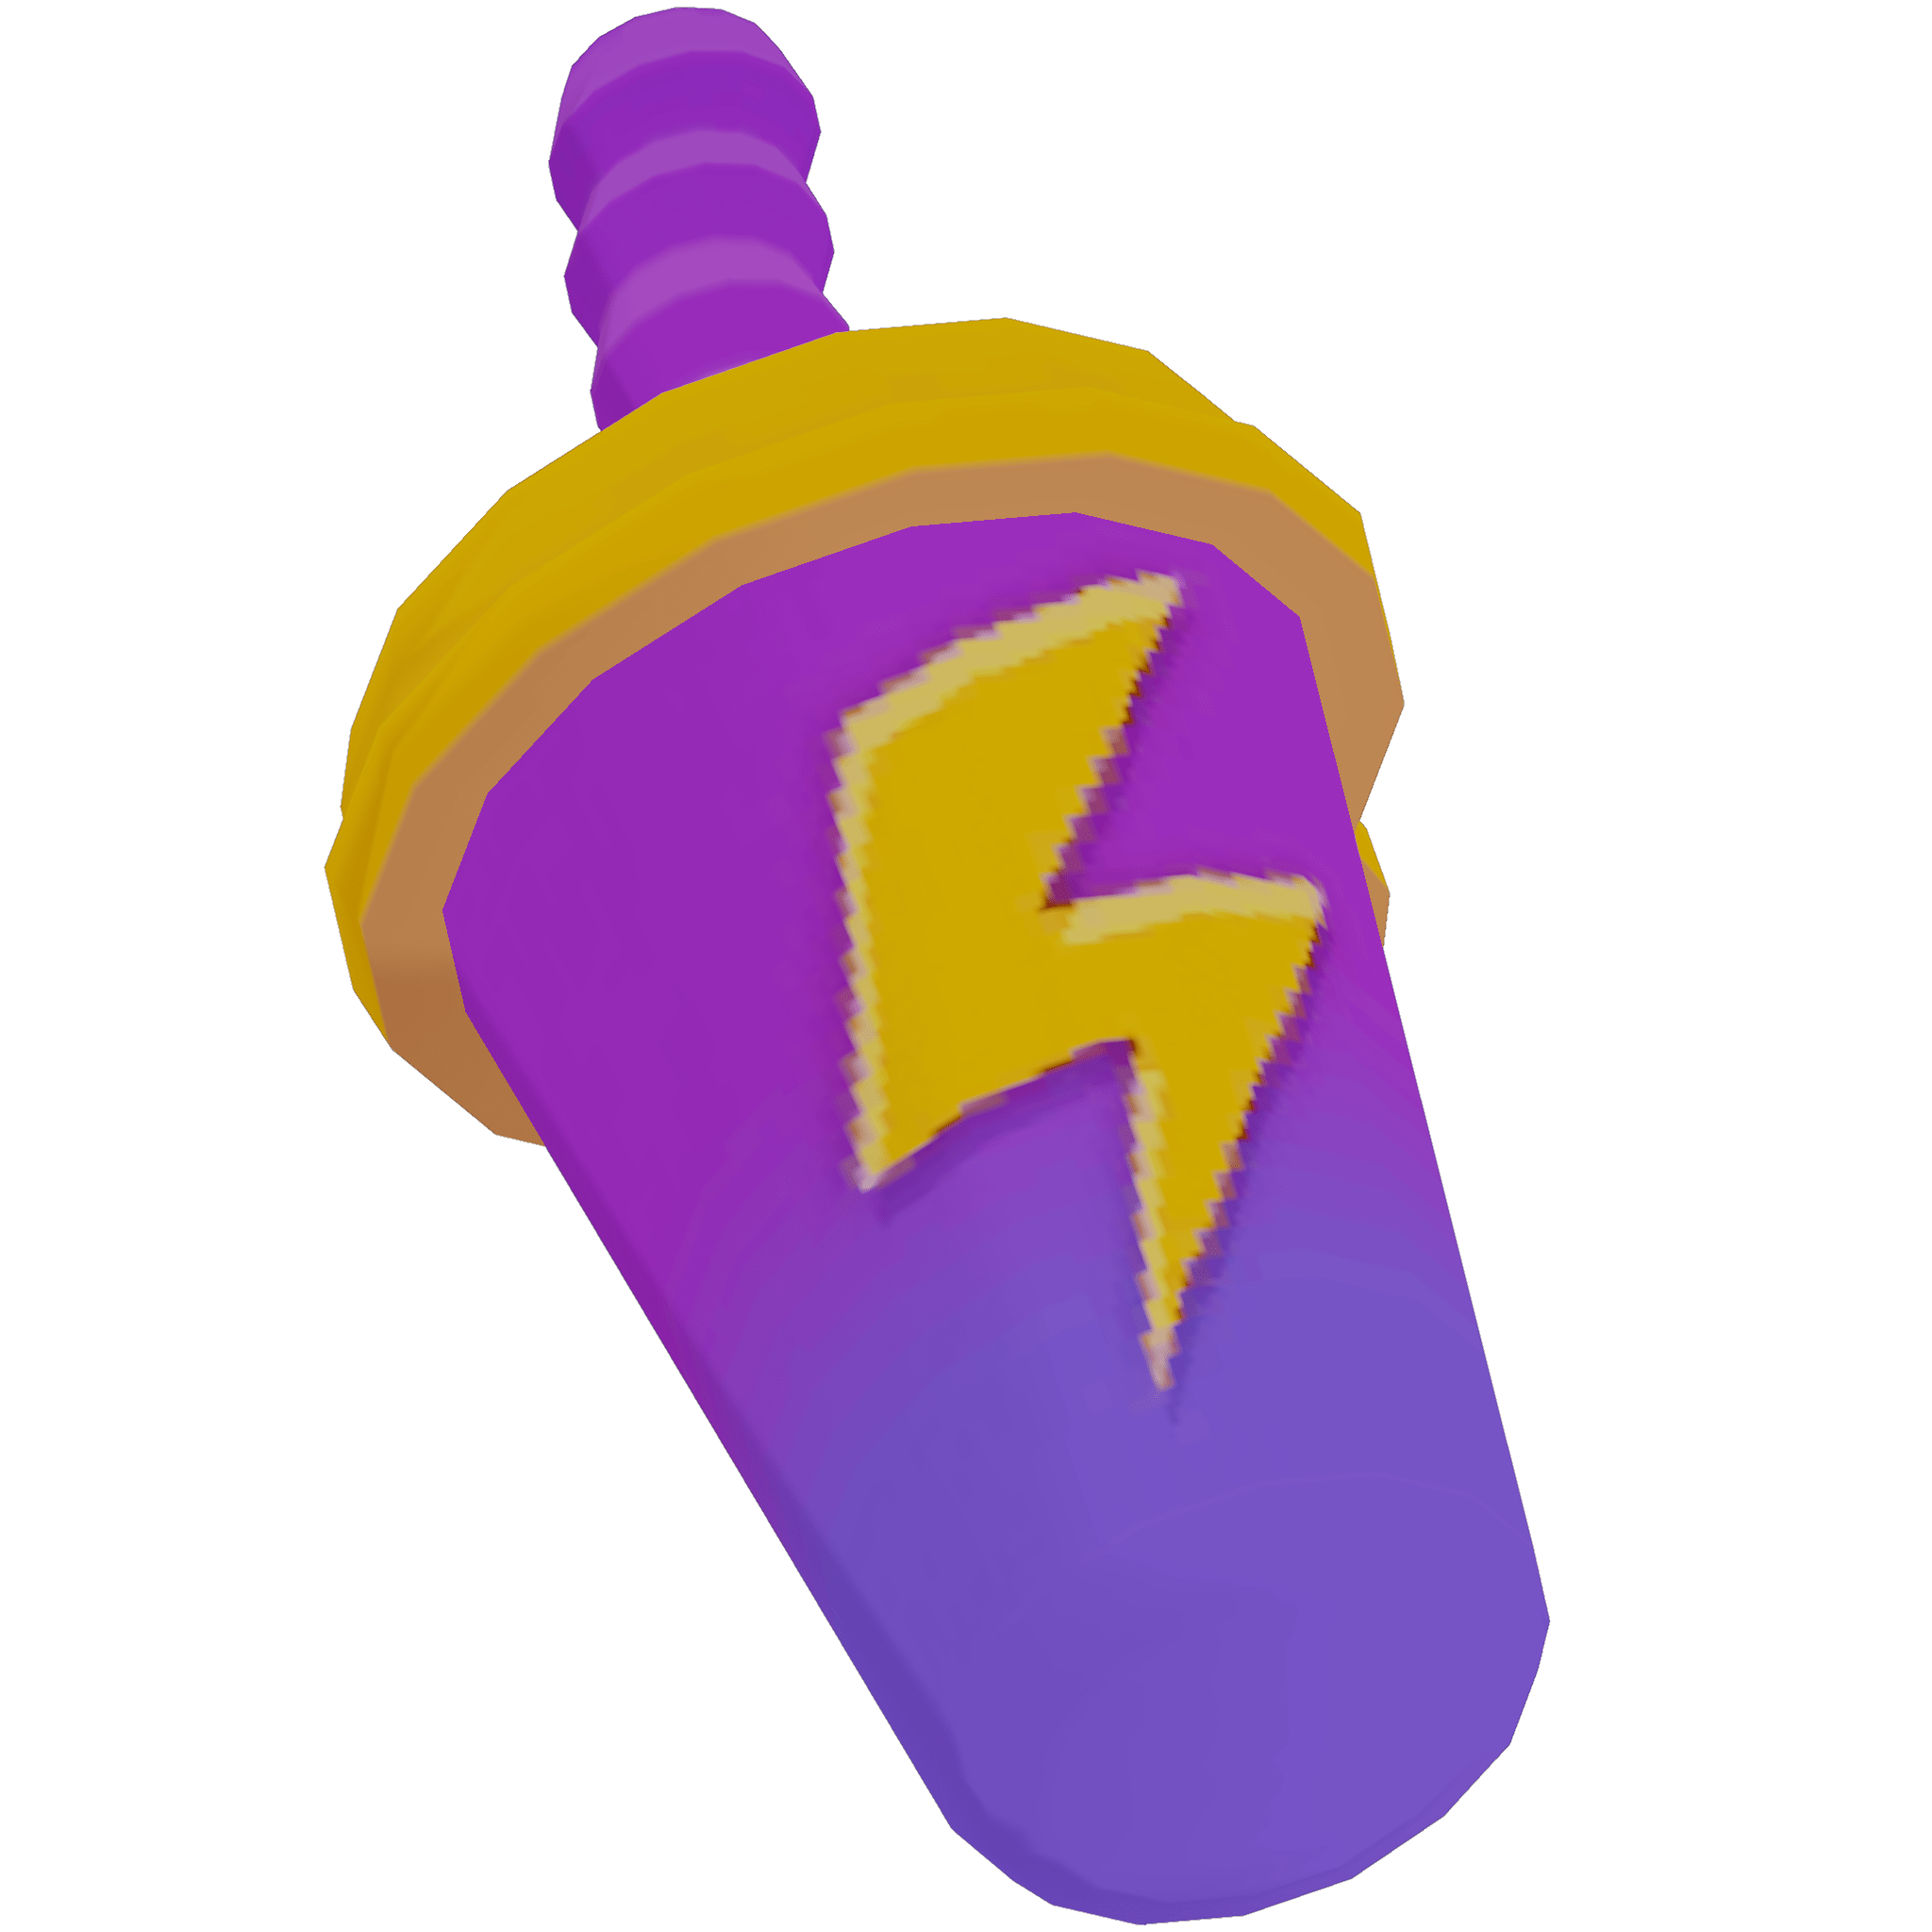 Here S A Render Of The Energy Drink If You Would Like To Make A Meme With It Fandom - brawl stars max energy drink